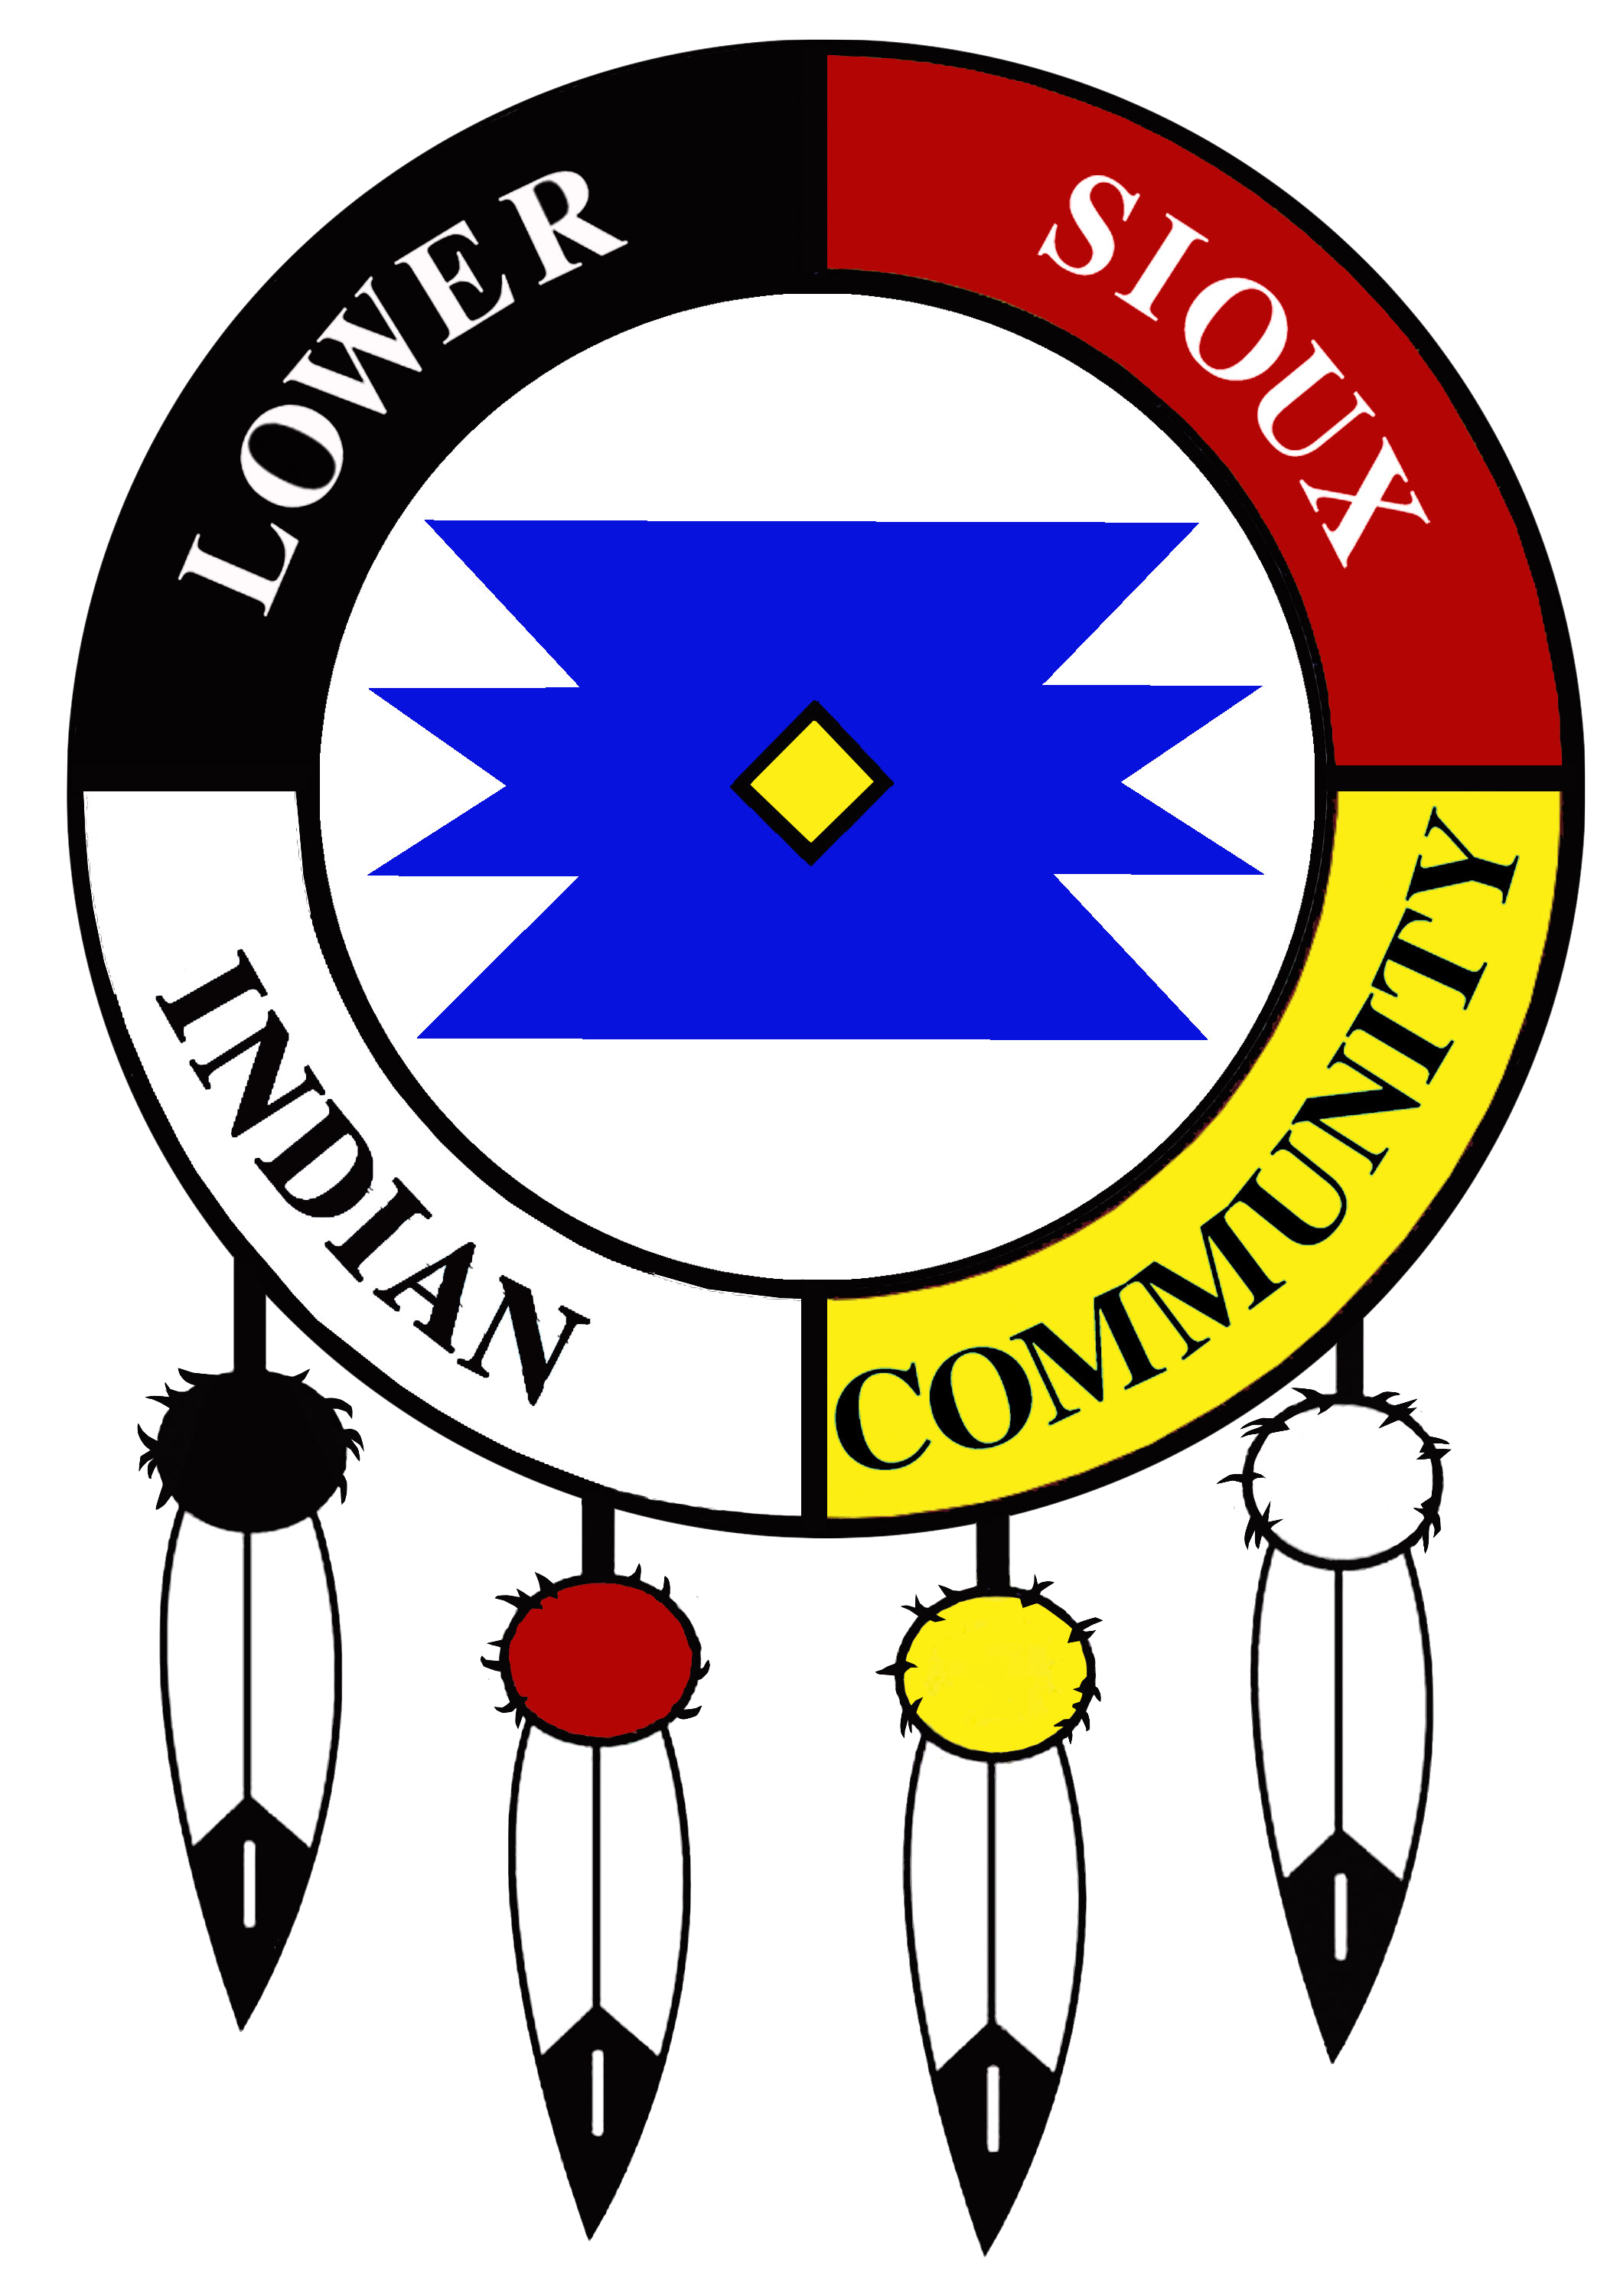 Lower Sioux Indian Community logo